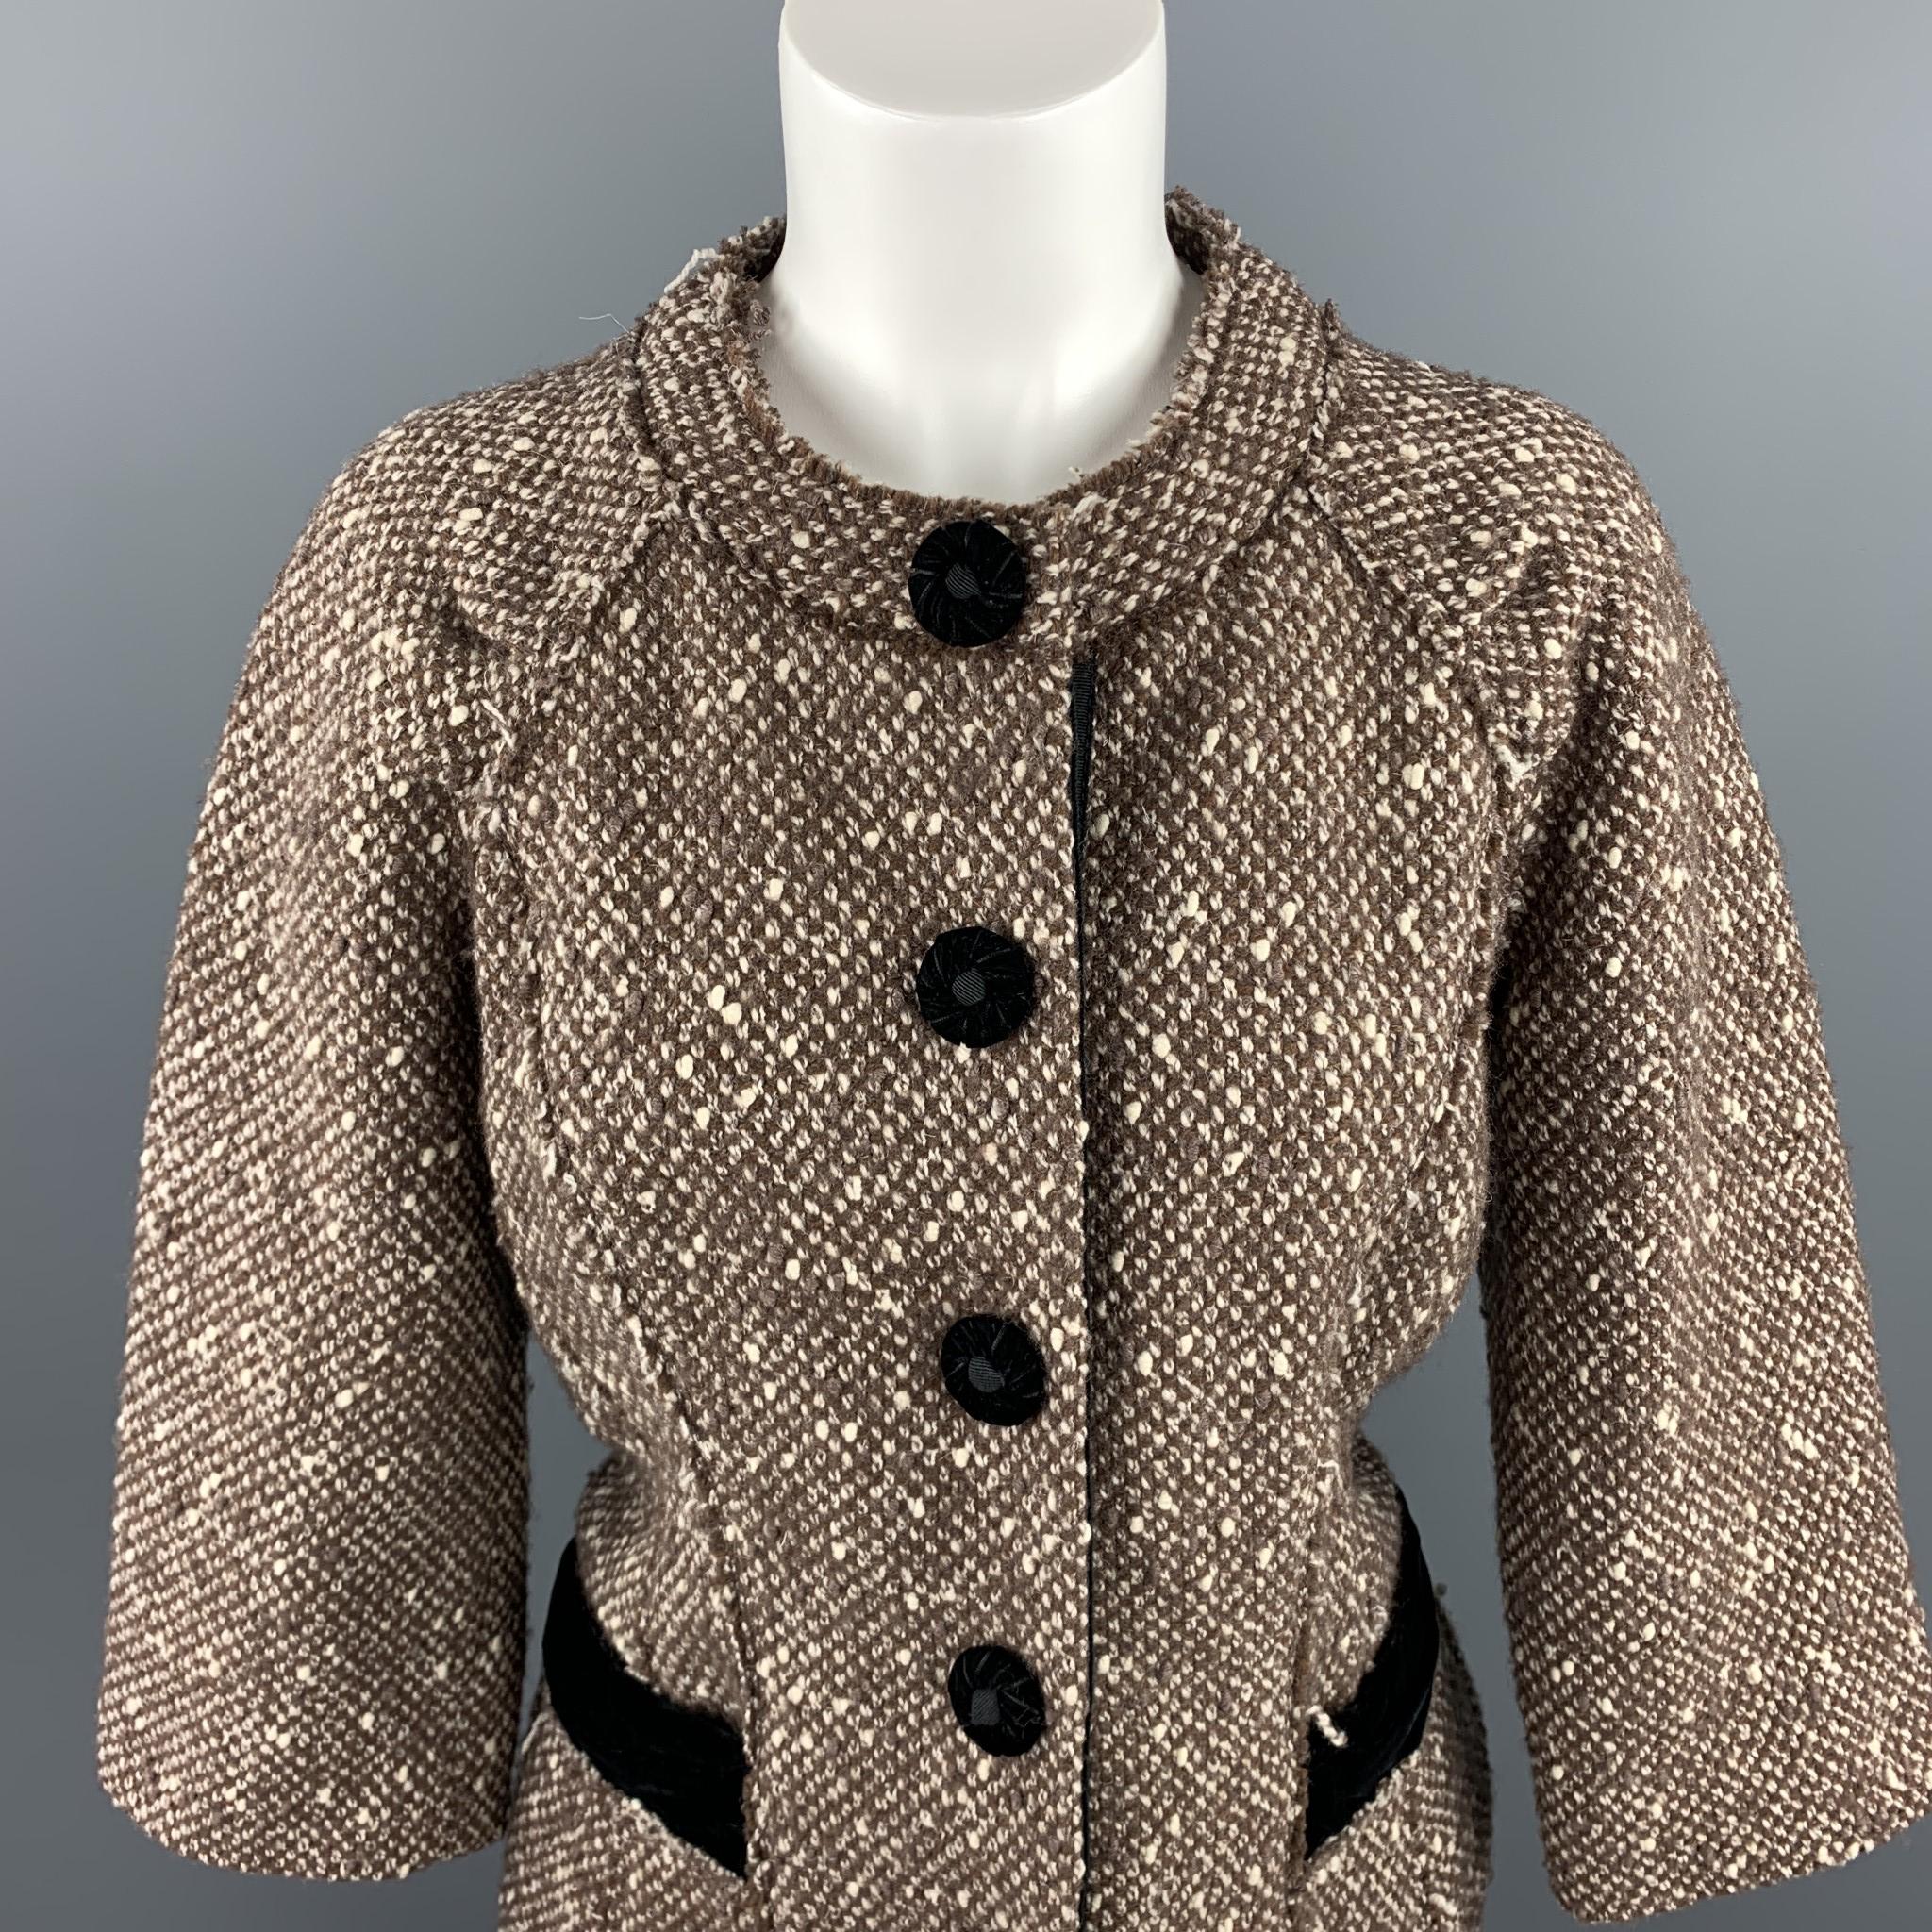 MARC JACOBS jacket comes in a brown boucle wool blend with a black velvet trim featuring a round neck, slit pockets, and a snap button closure with velvet buttons. Made in USA.

Very Good Pre-Owned Condition.
Marked: 6

Measurements:

Shoulder: 17.5